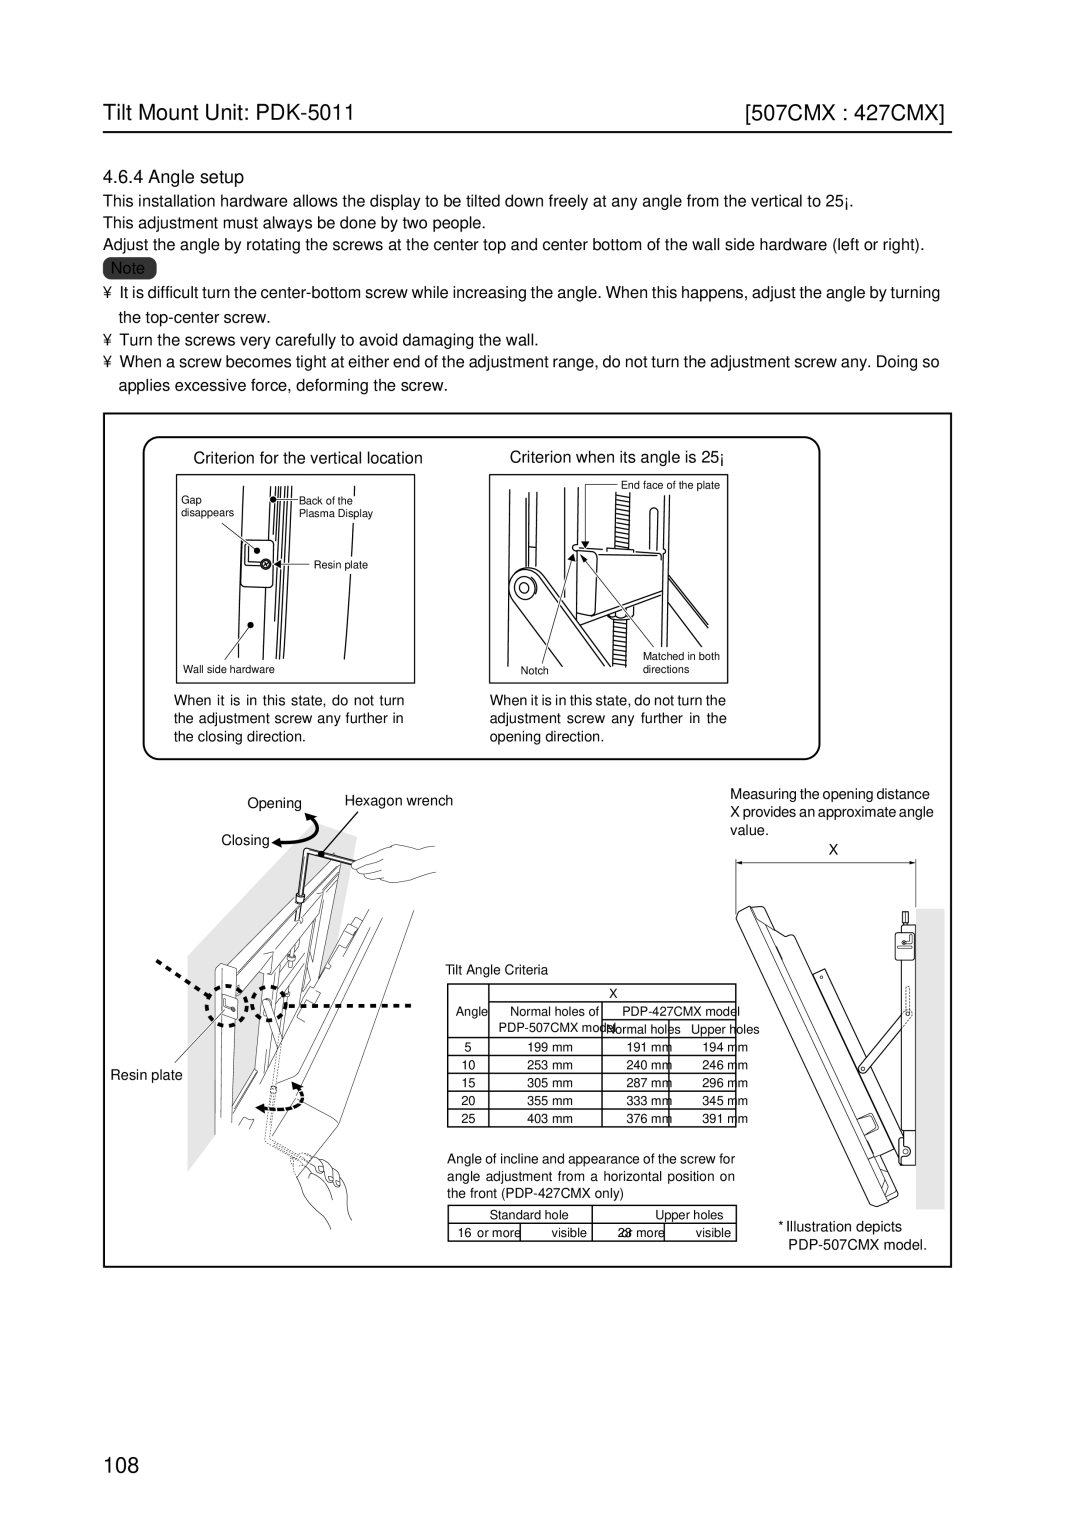 Pioneer PDP 427CMX technical manual Angle setup, Criterion for the vertical location, Criterion when its angle is 